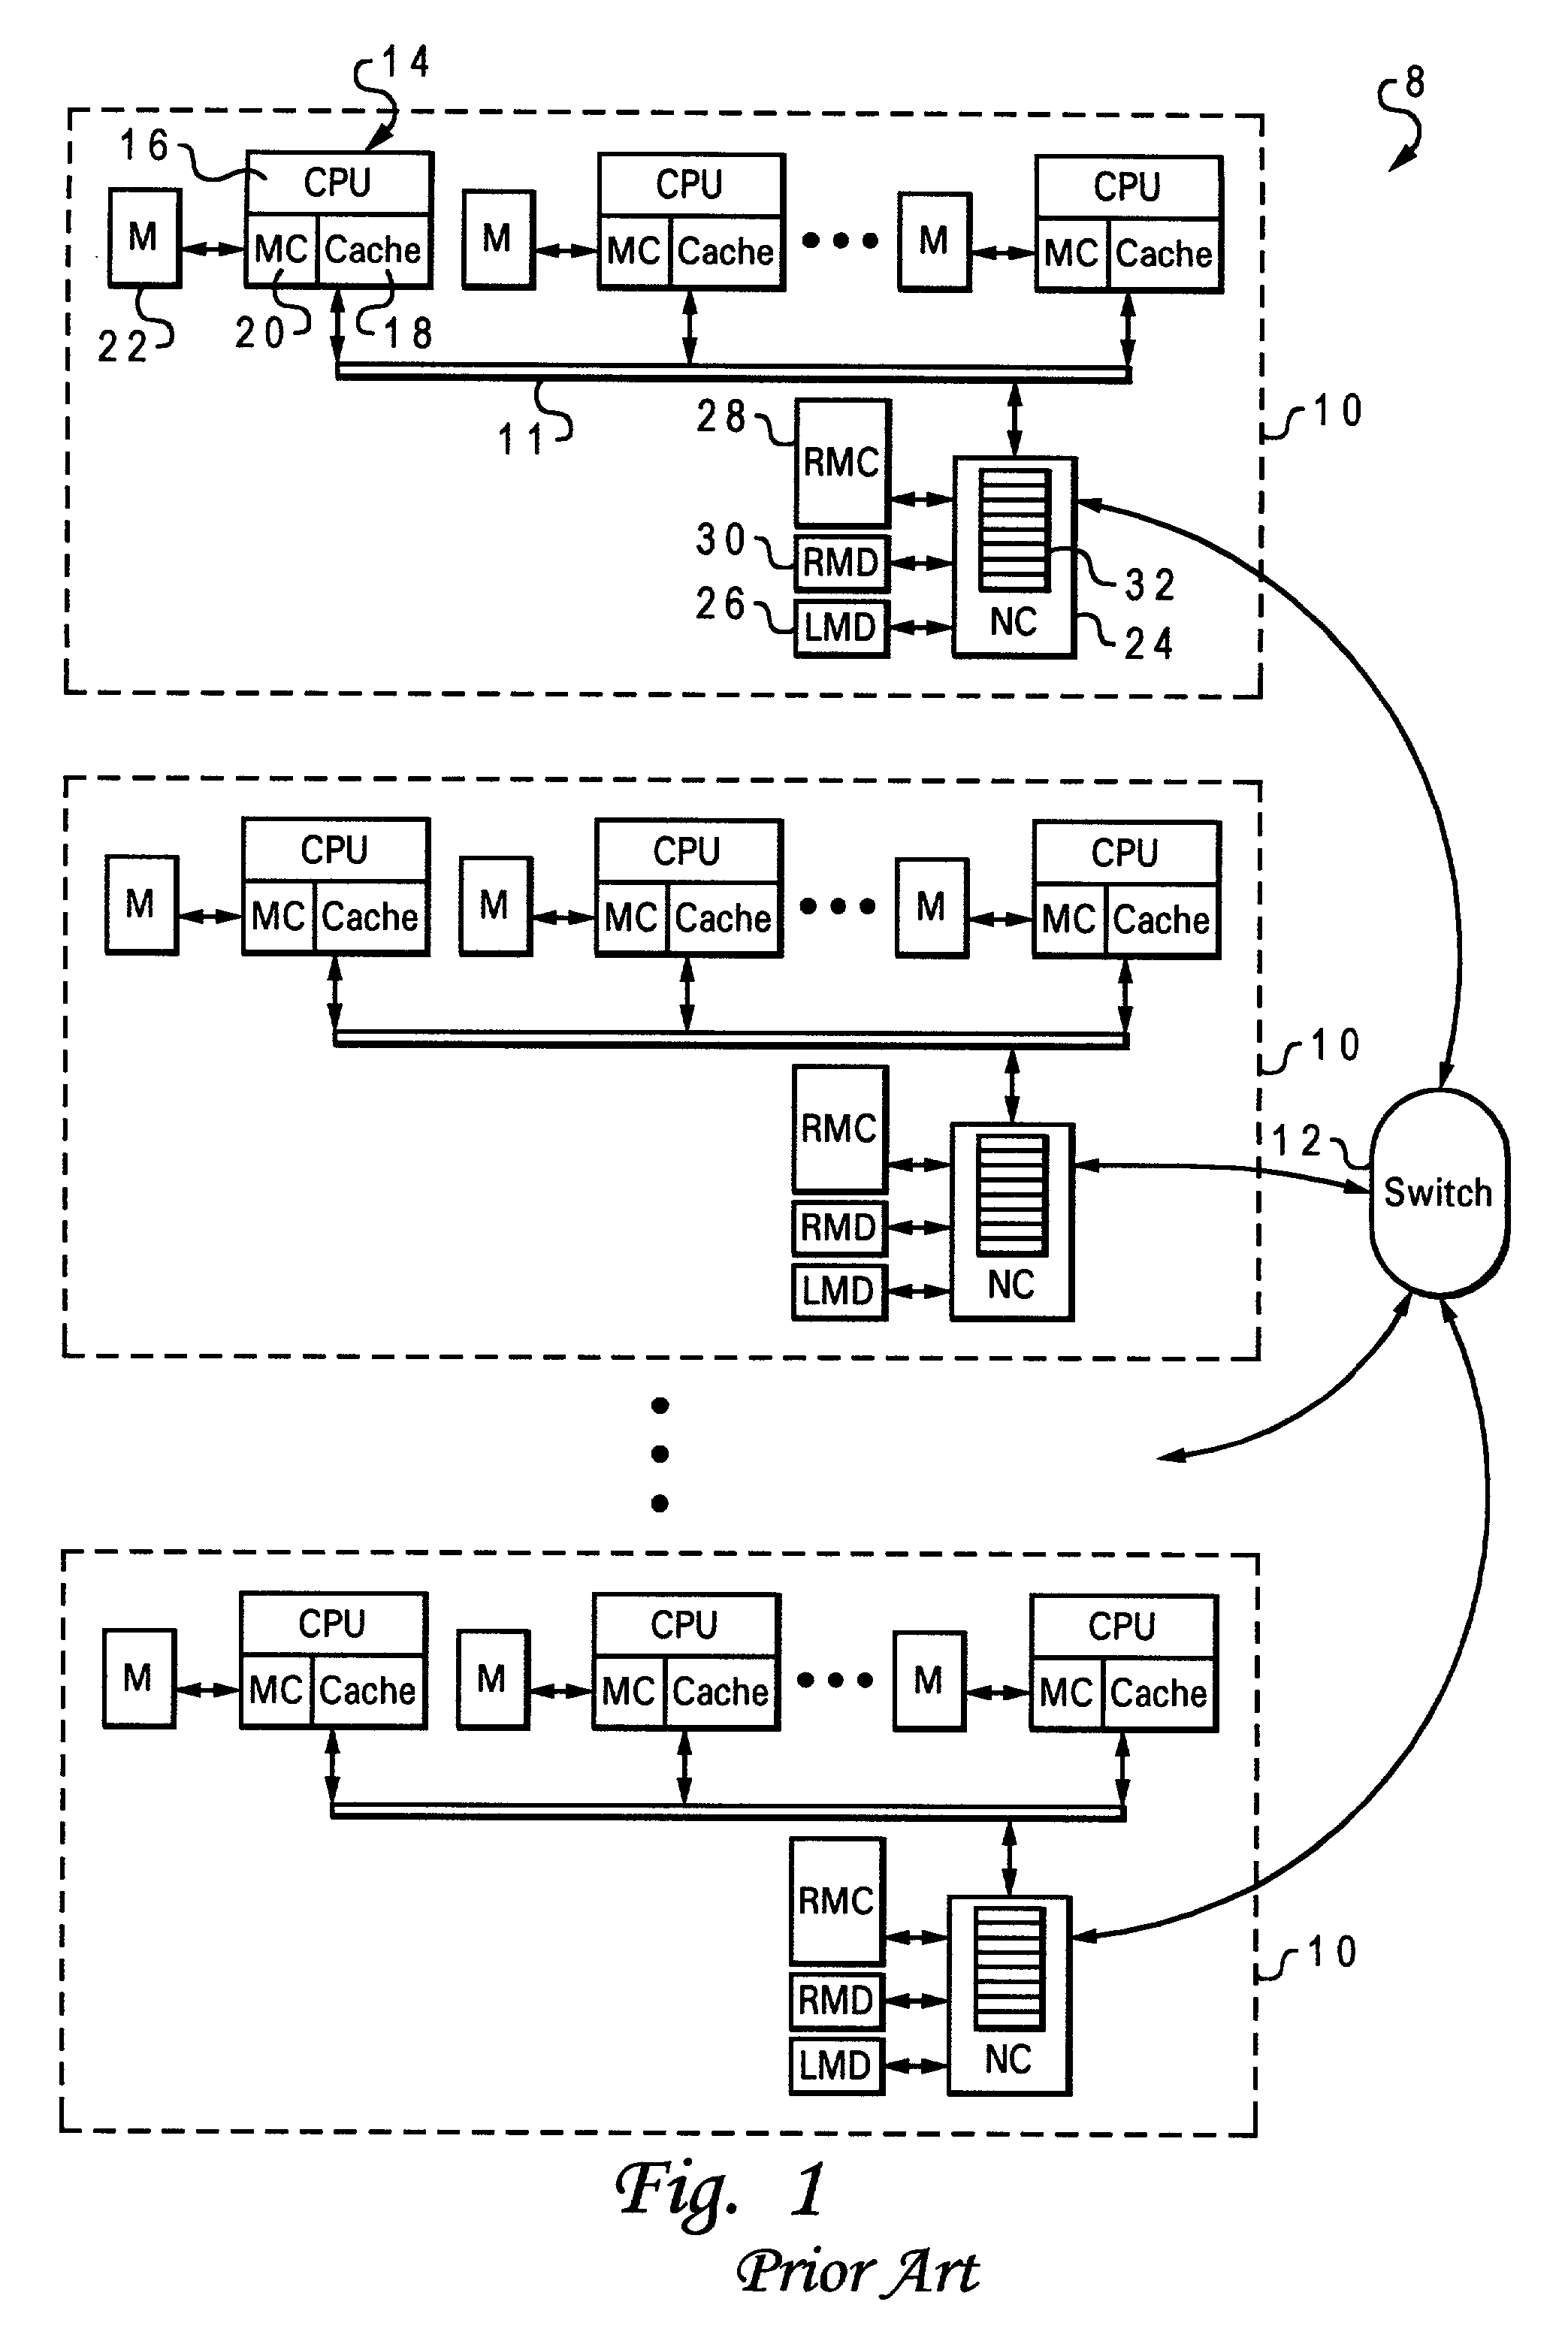 Non-uniform memory access (NUMA) data processing system having remote memory cache incorporated within system memory